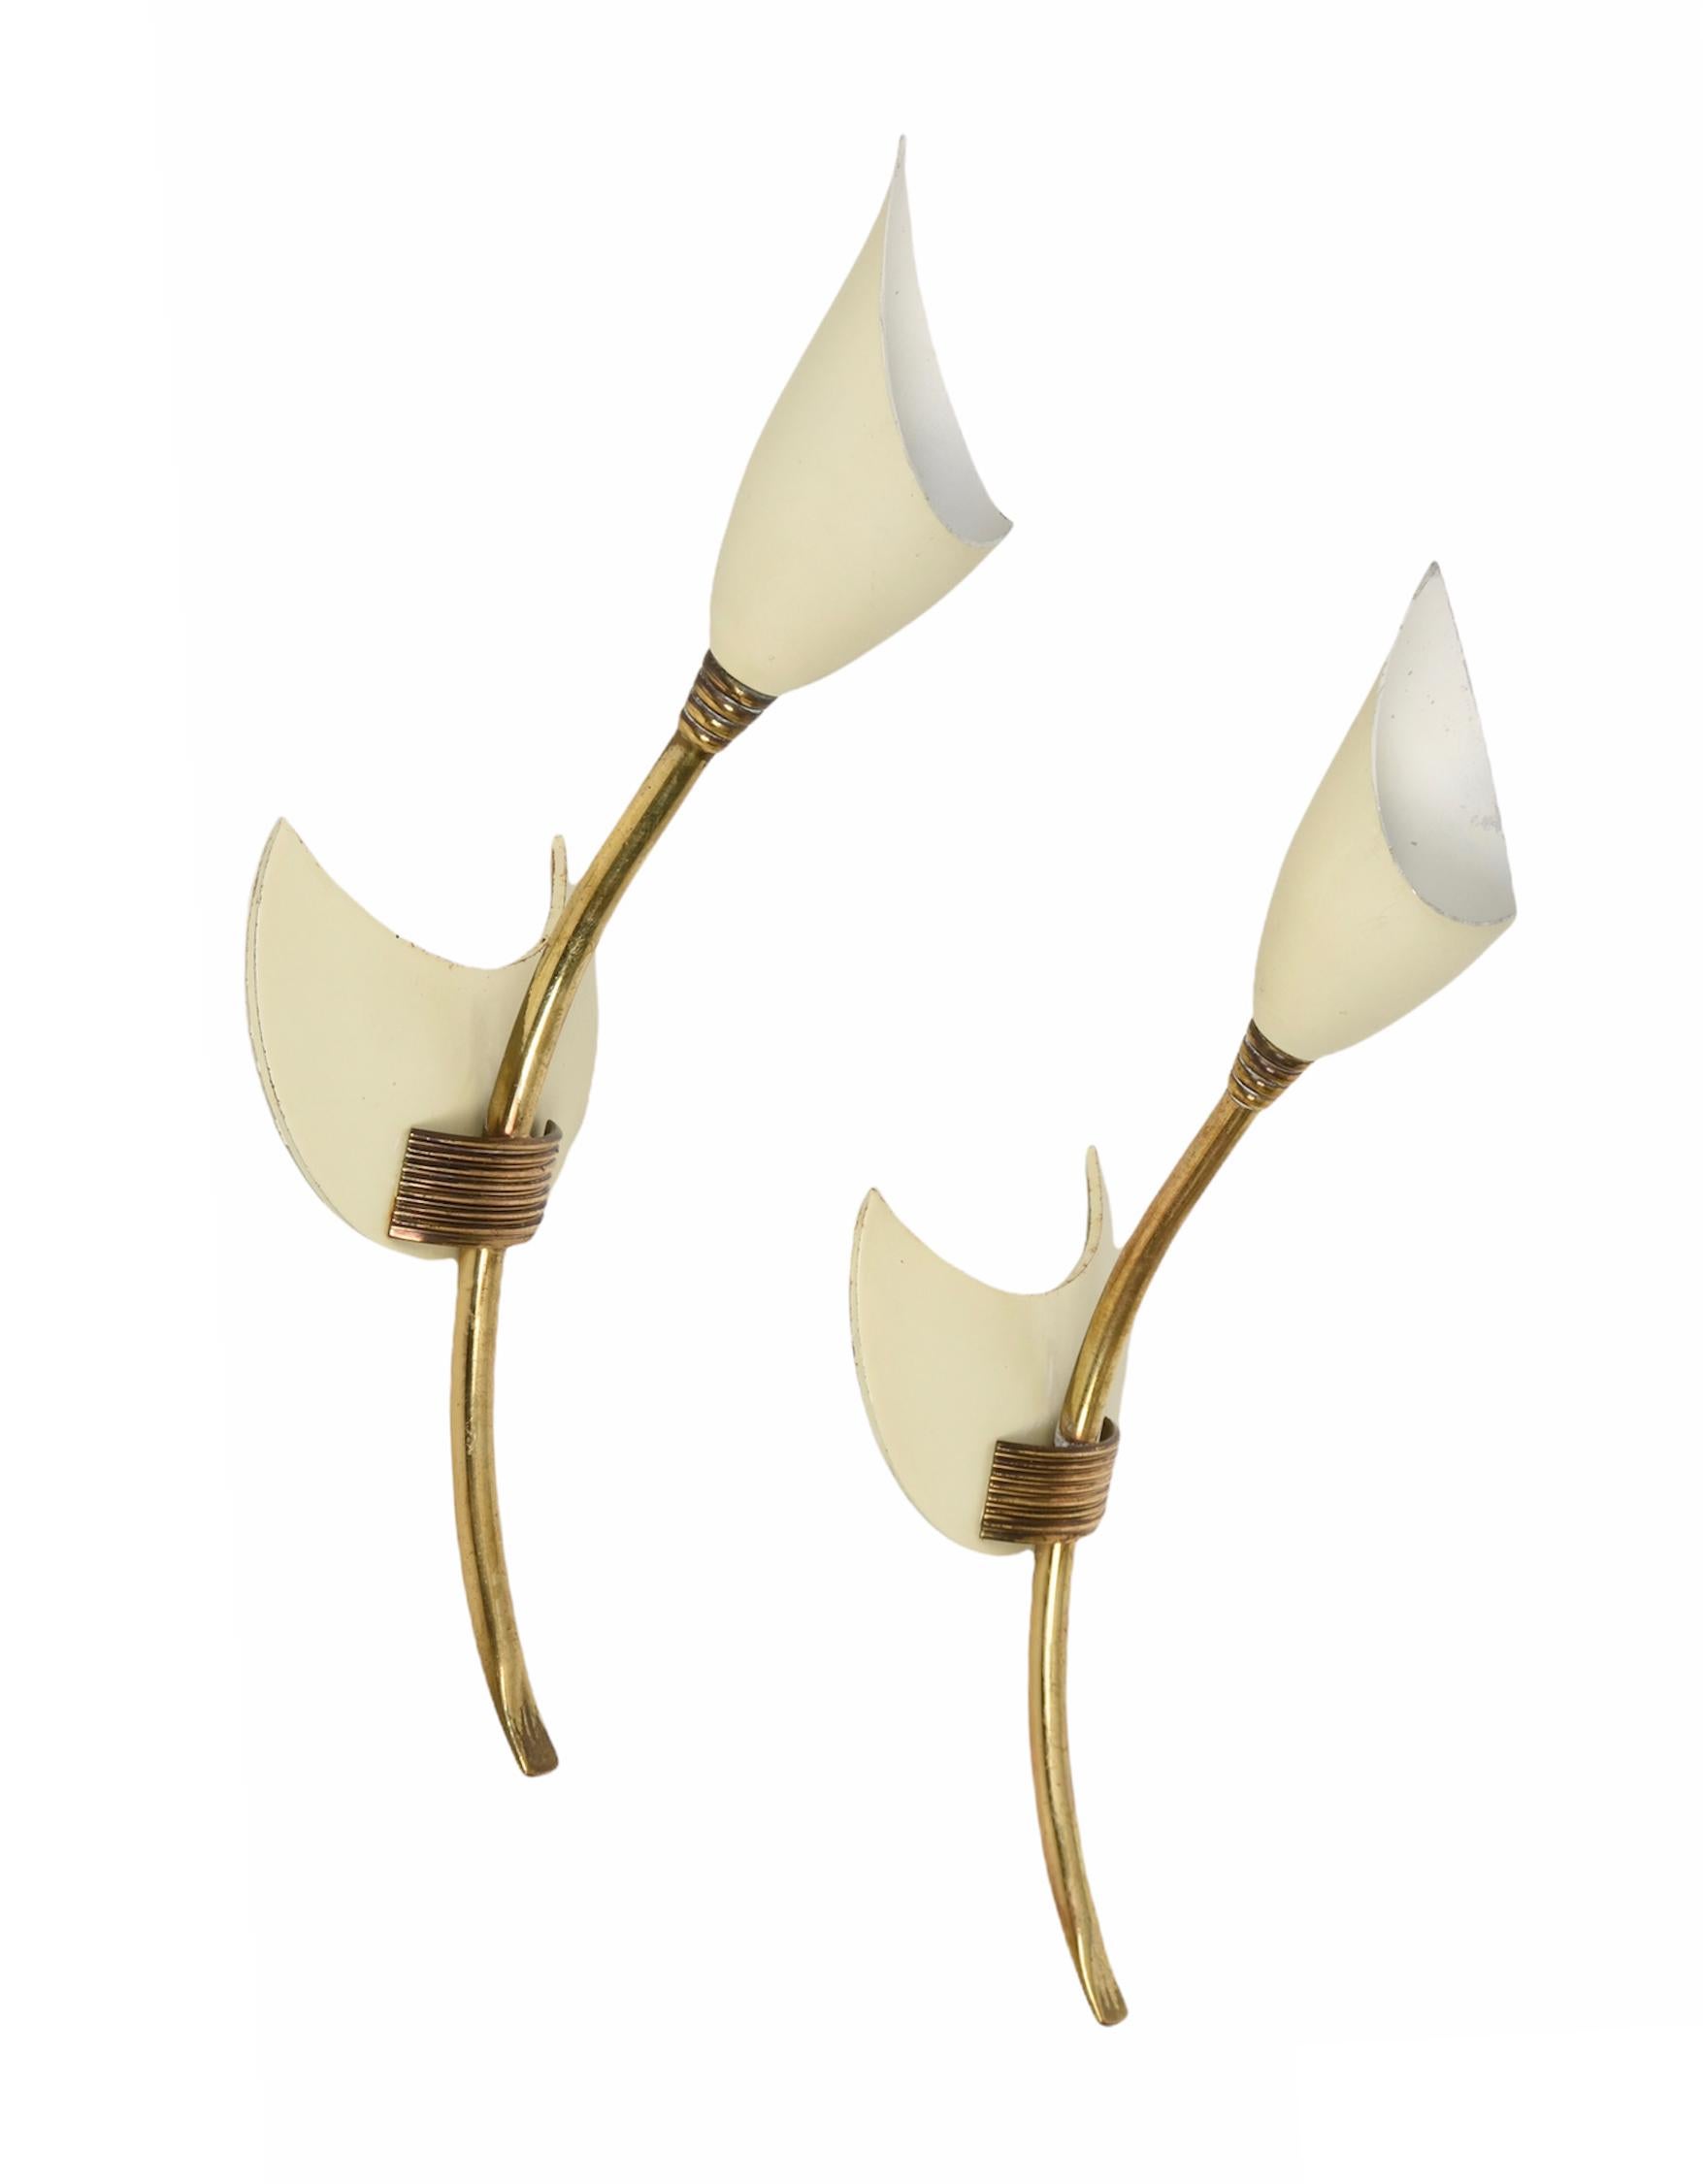 Pair of GCME Midcentury Brass and Enamelled Aluminum Italian Tulip Sconces 1950s For Sale 2